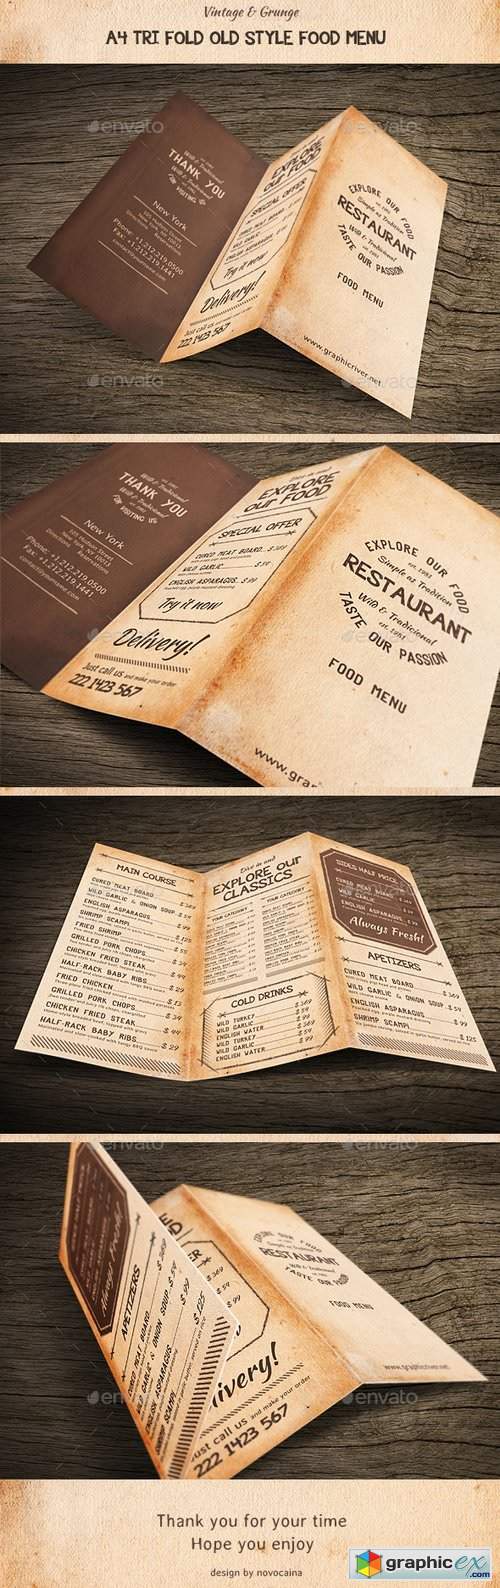 Old Style A4 Trifold Food Menu